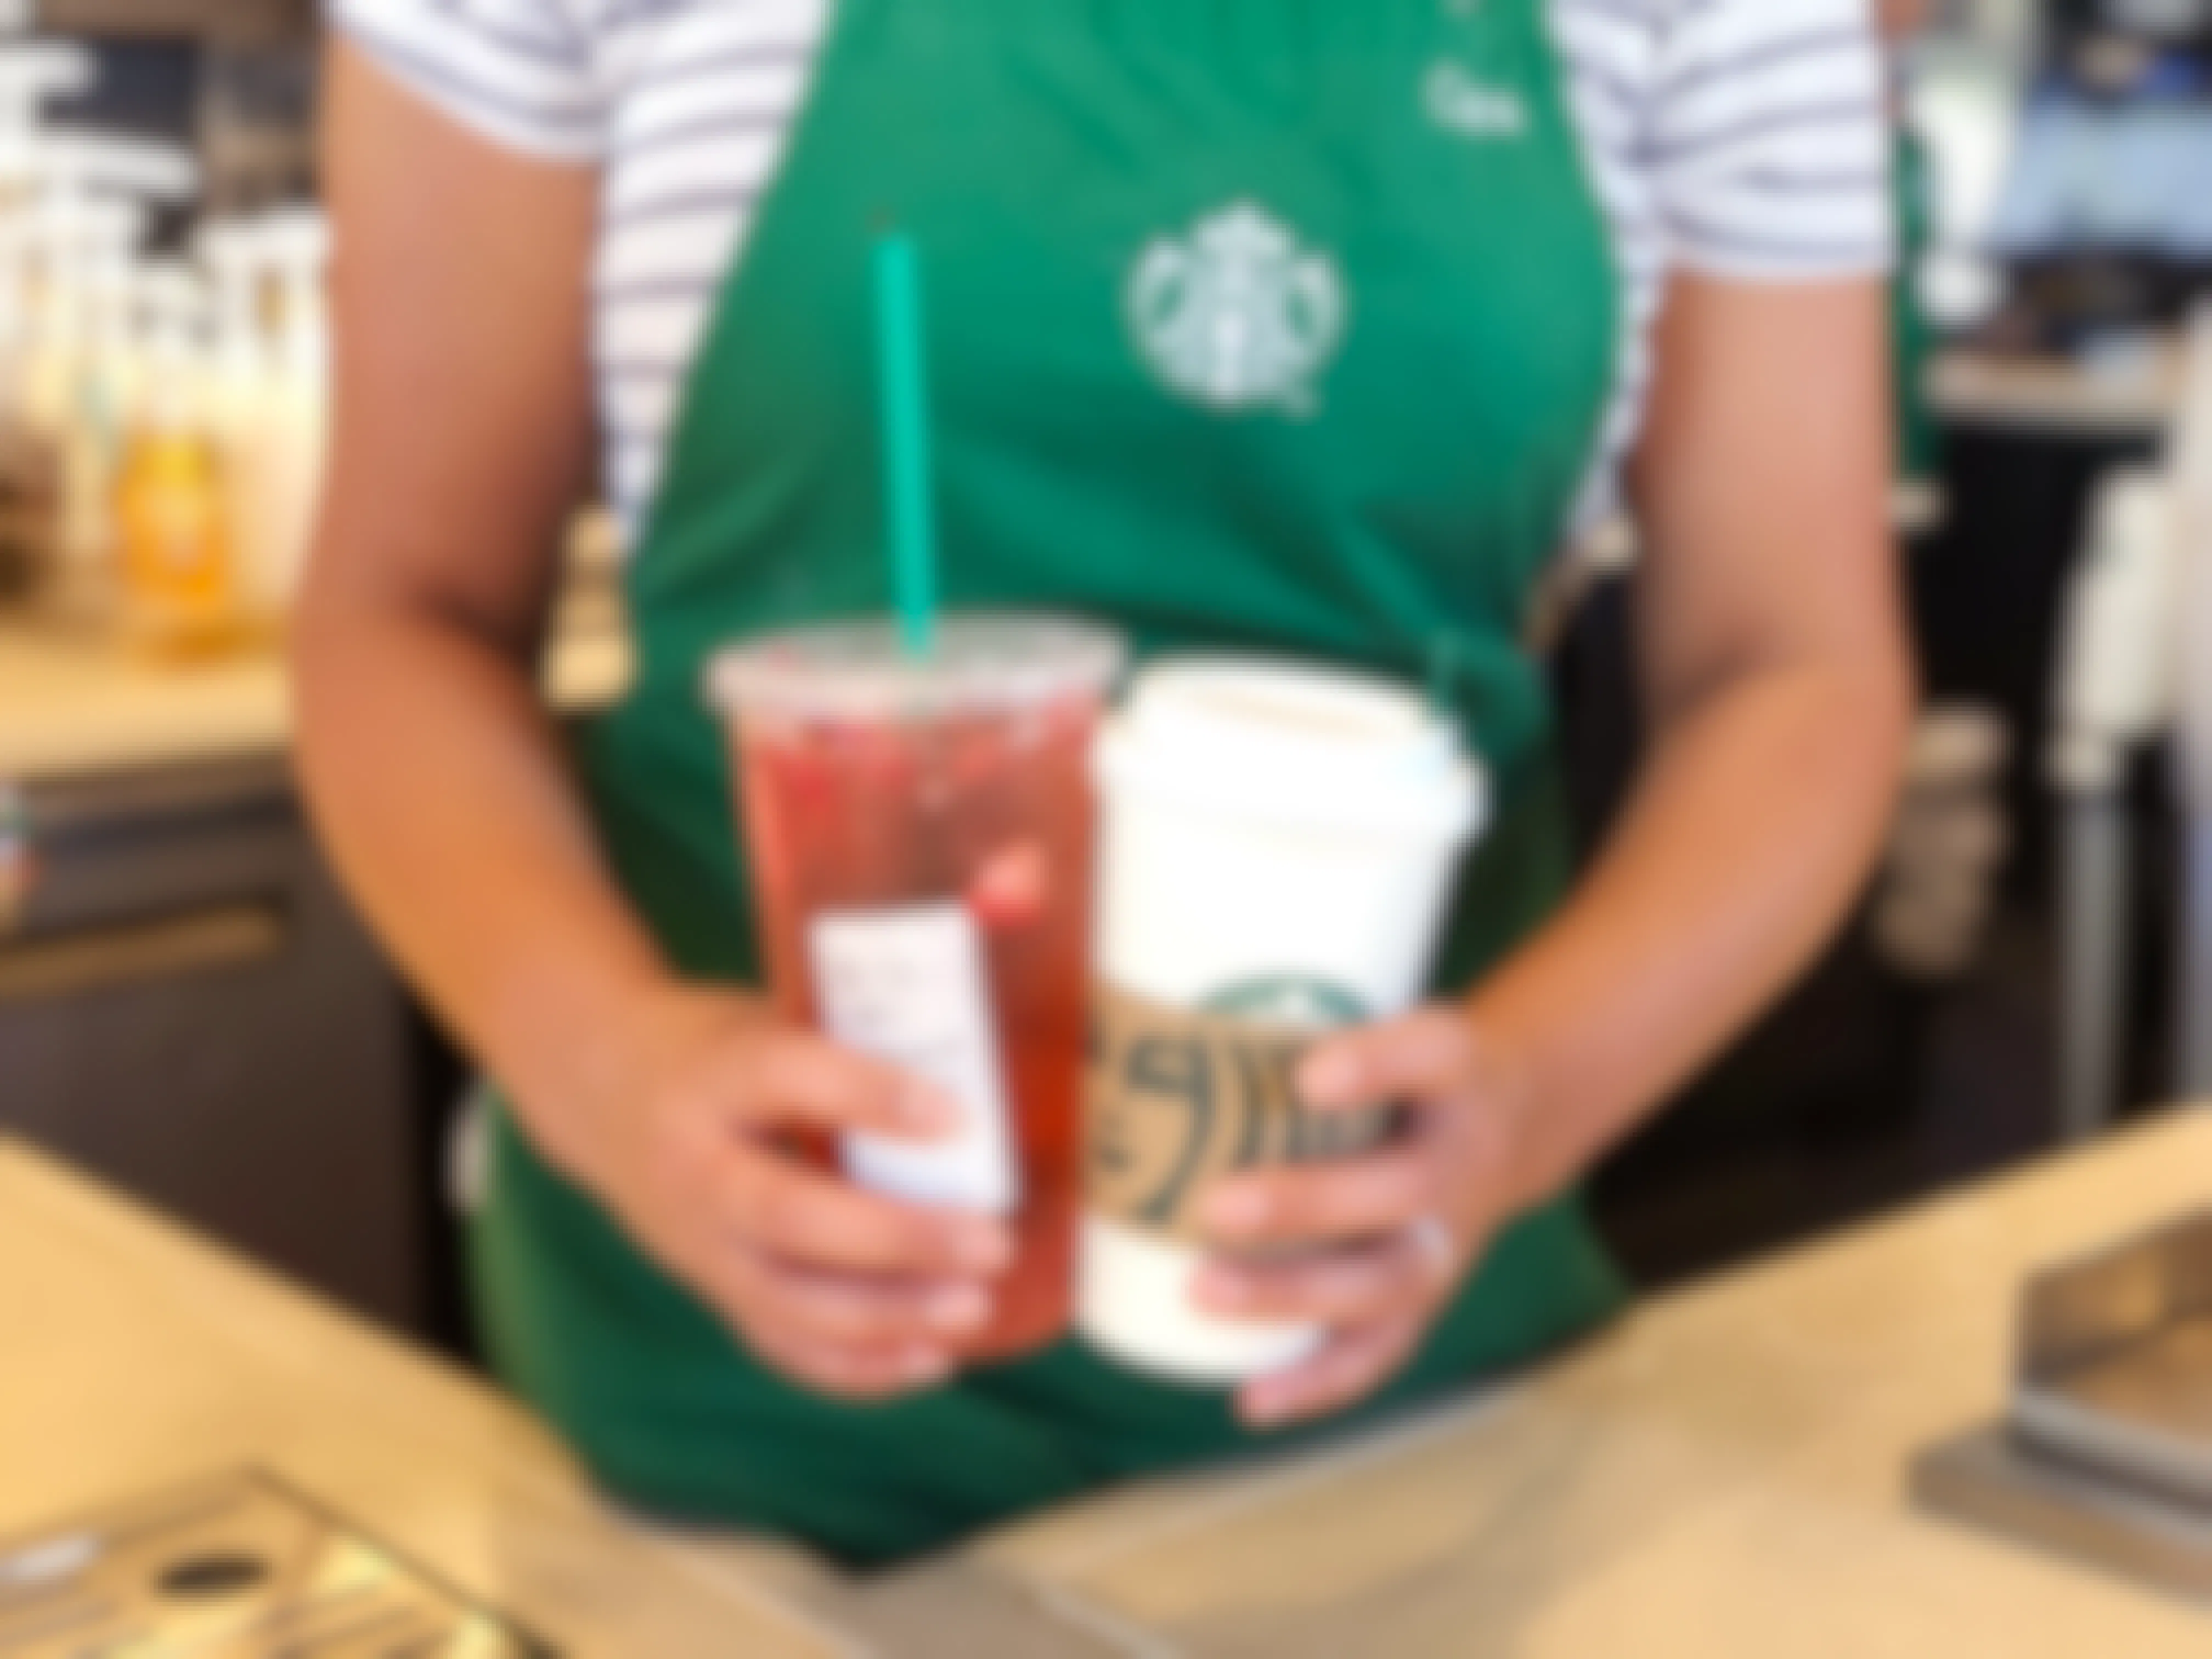 A Starbucks barista holding two Starbucks drinks over the counter.